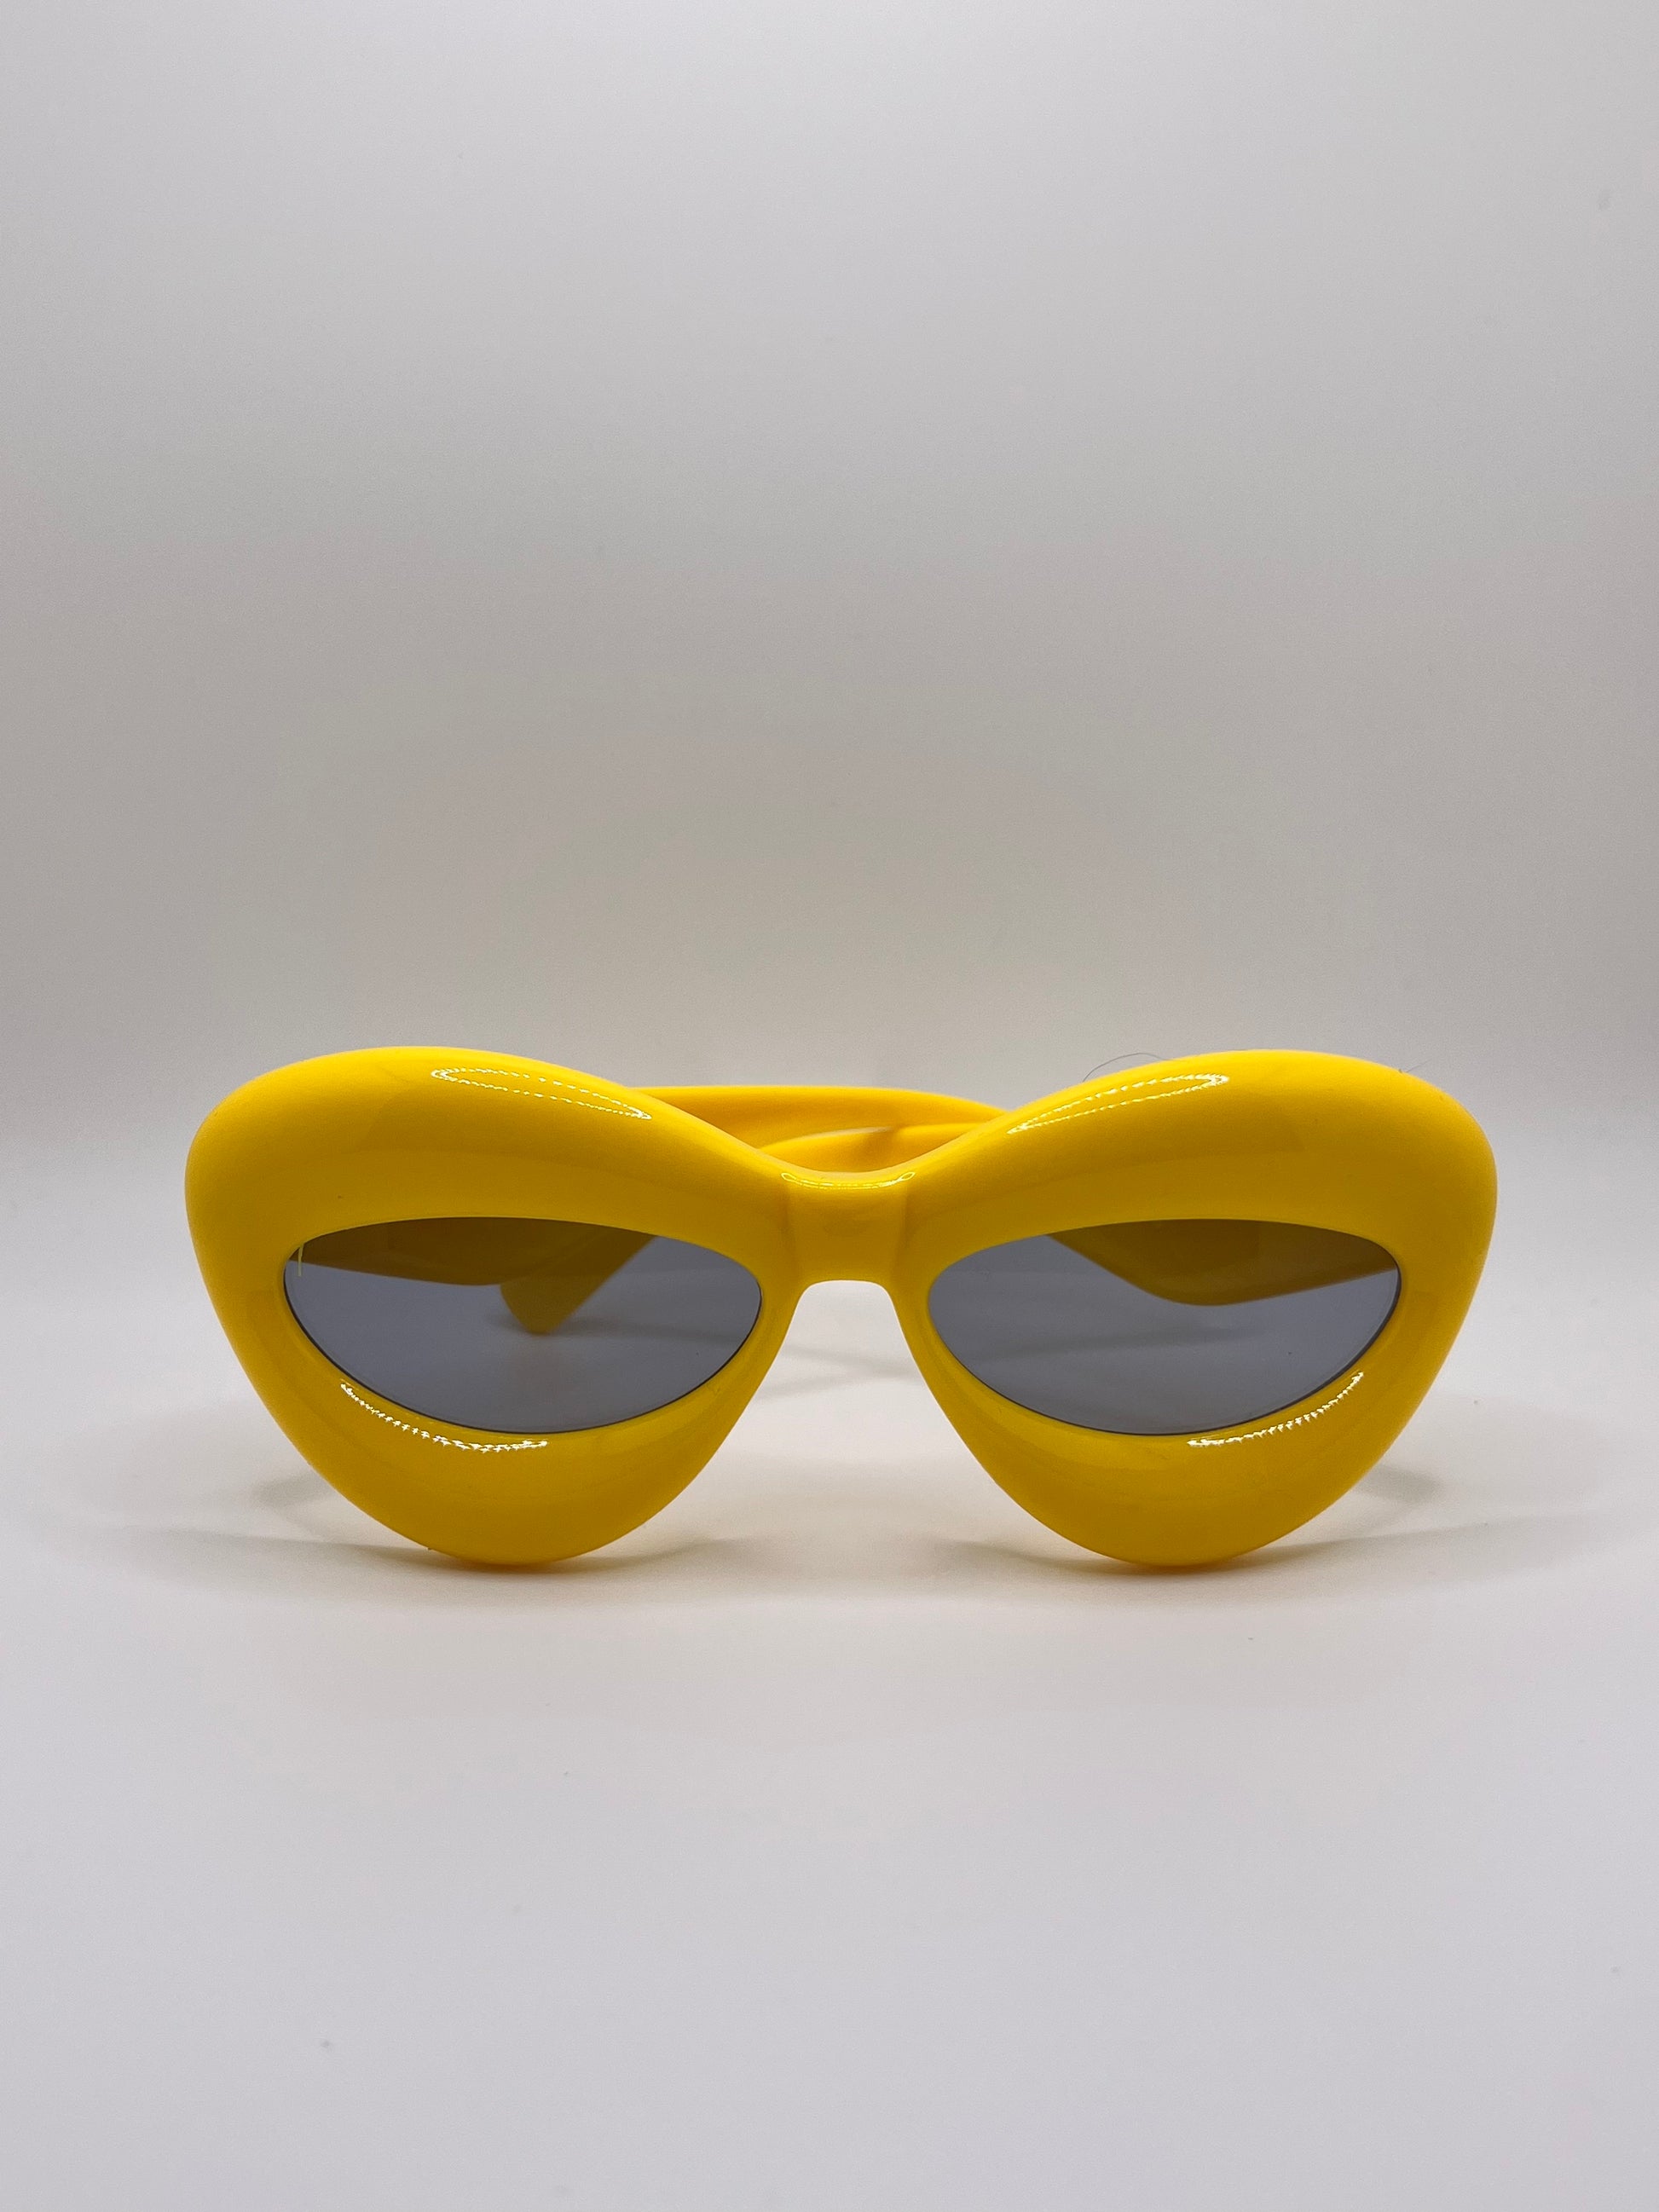 These inflated sunglasses in yellow are giving effortless icon. Try them in every color and add a splash of extra to any outfit. These work for formal events or a day of errands and will make you feel glam every step of the way.